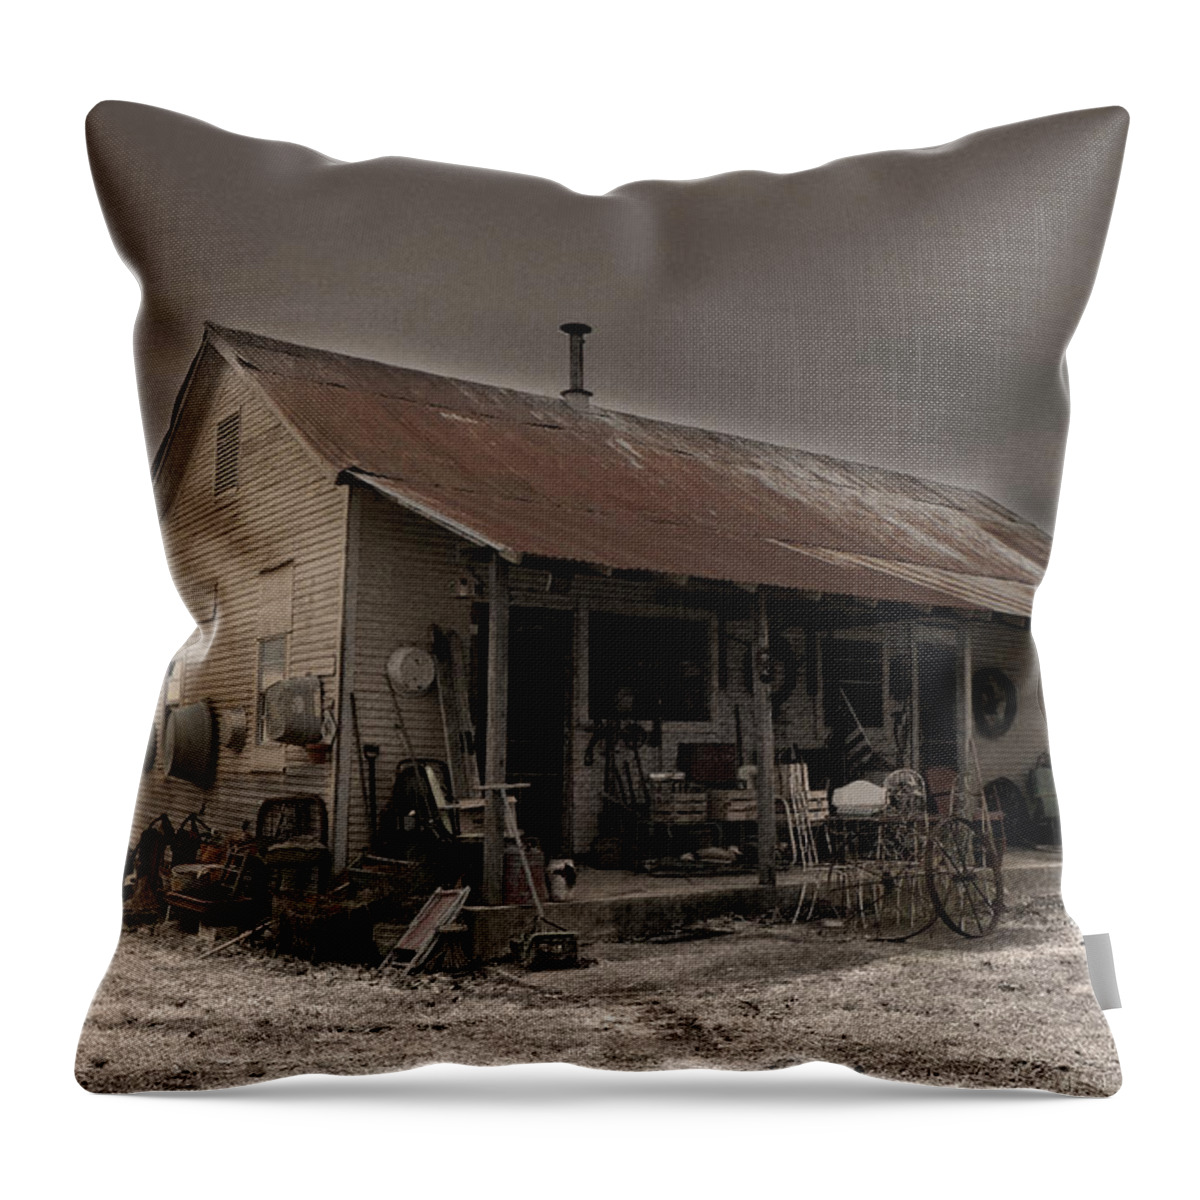 Noland Country Store Throw Pillow featuring the digital art Noland Country Store by William Fields